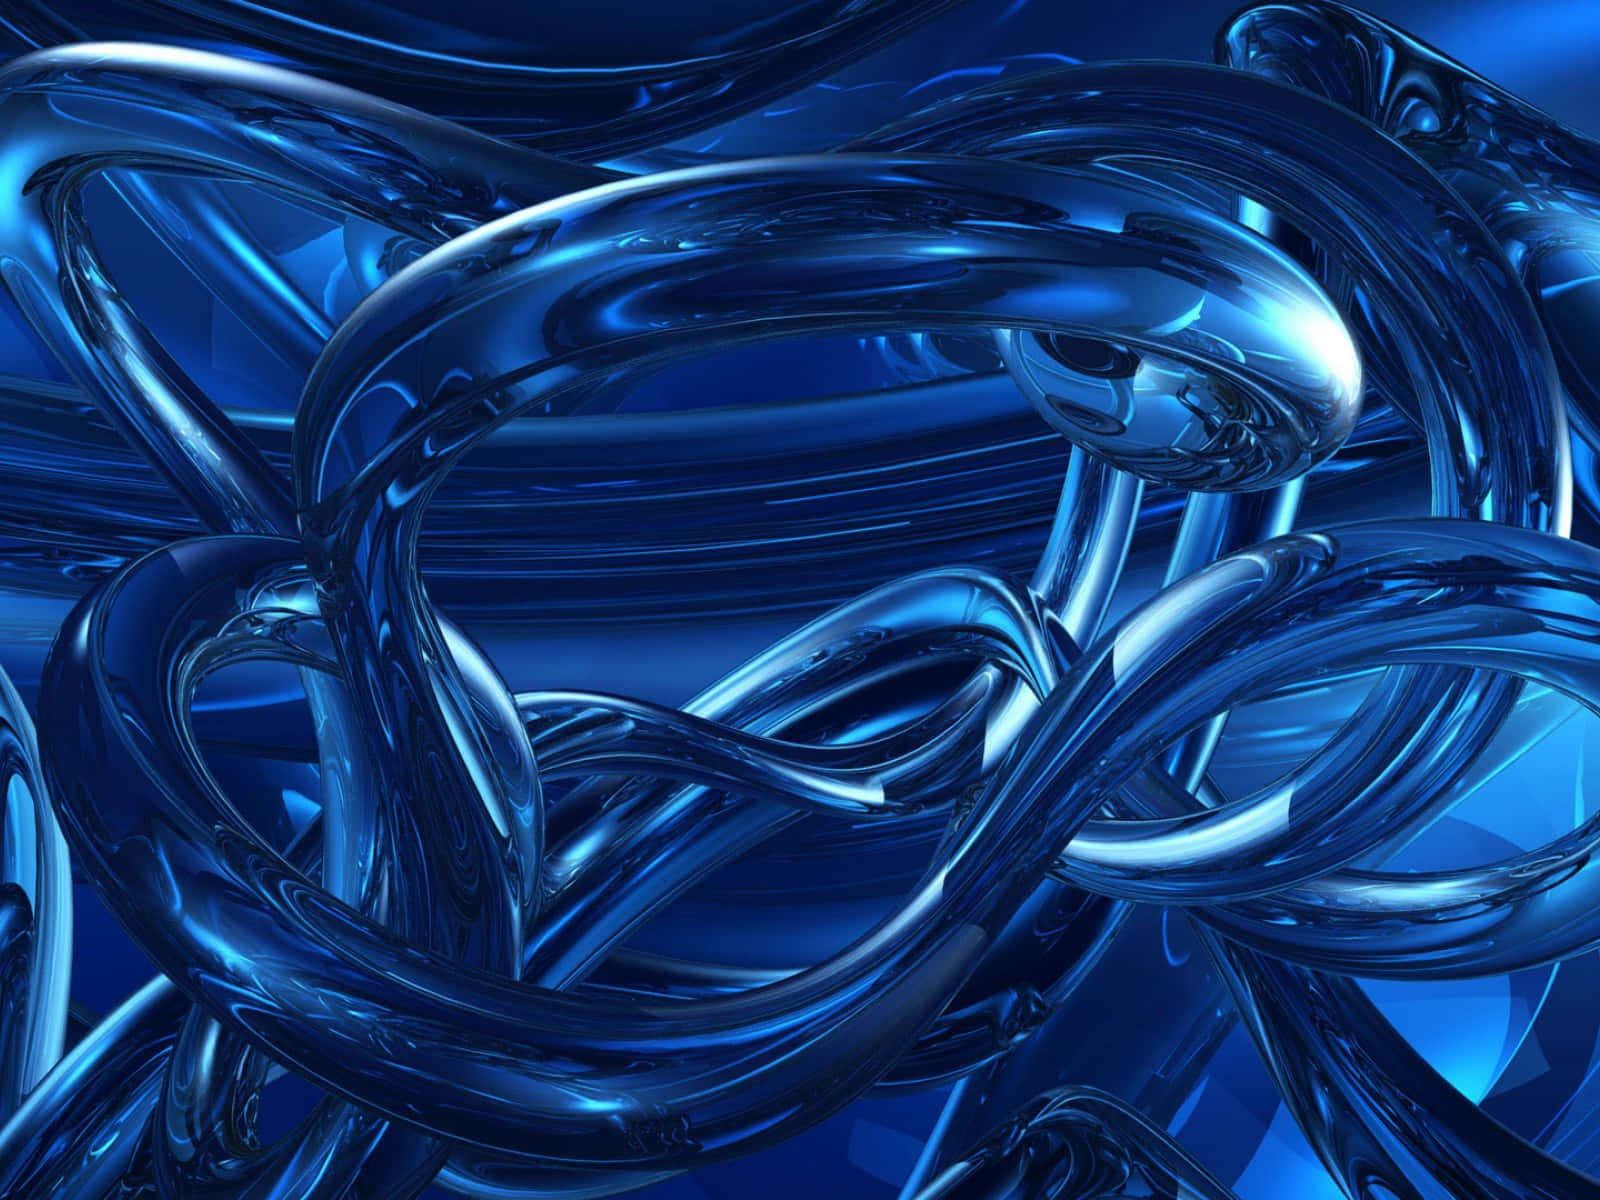 A Blue Abstract Background With A Lot Of Swirls